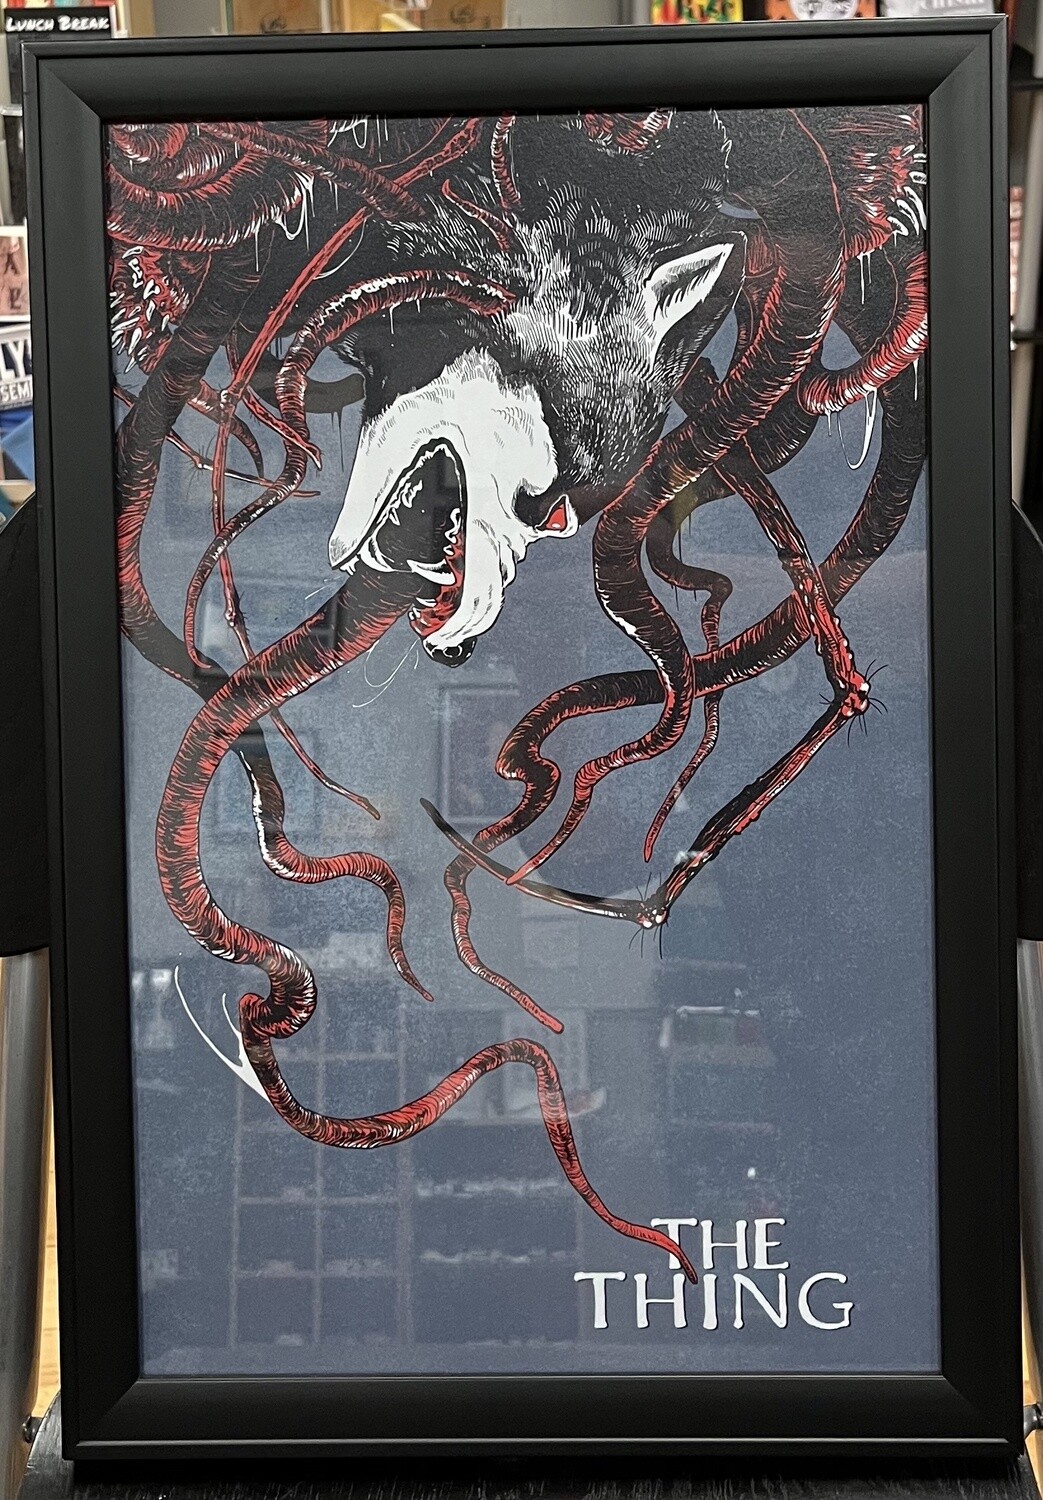 THE THING - Framed Print by Morgan Robles